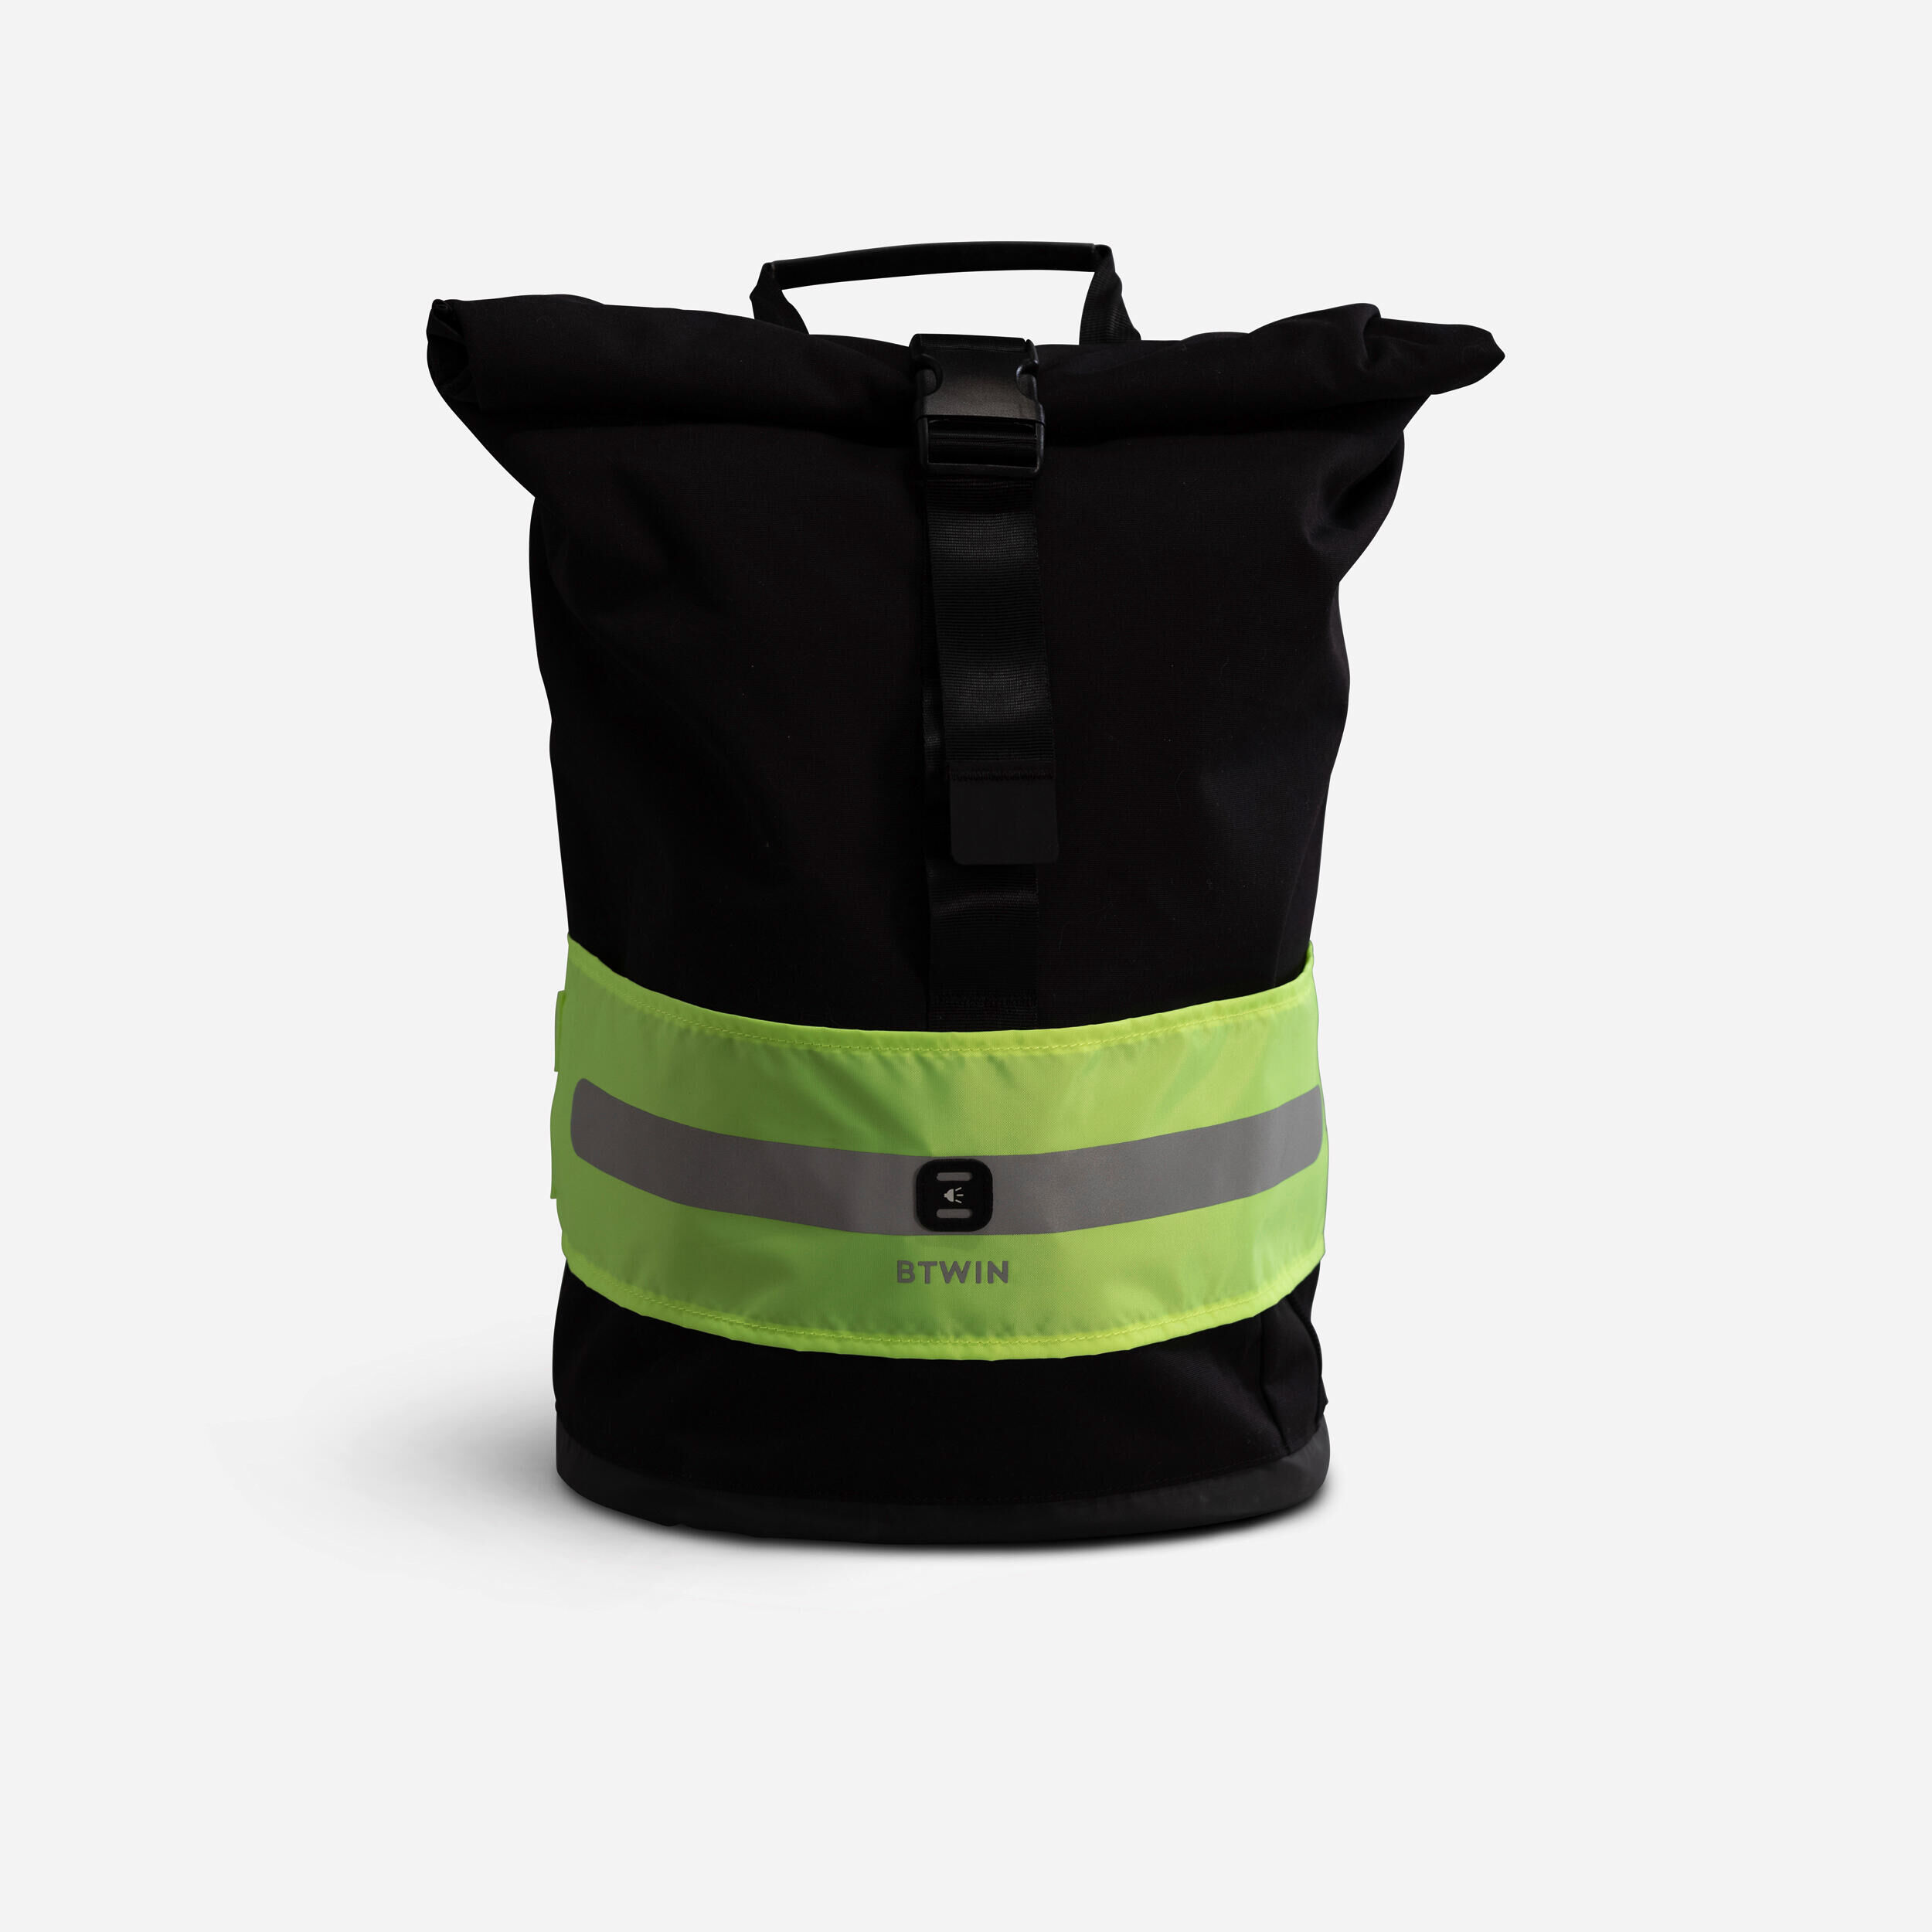 BTWIN Day and Night Visibility Bag Band - Neon Yellow